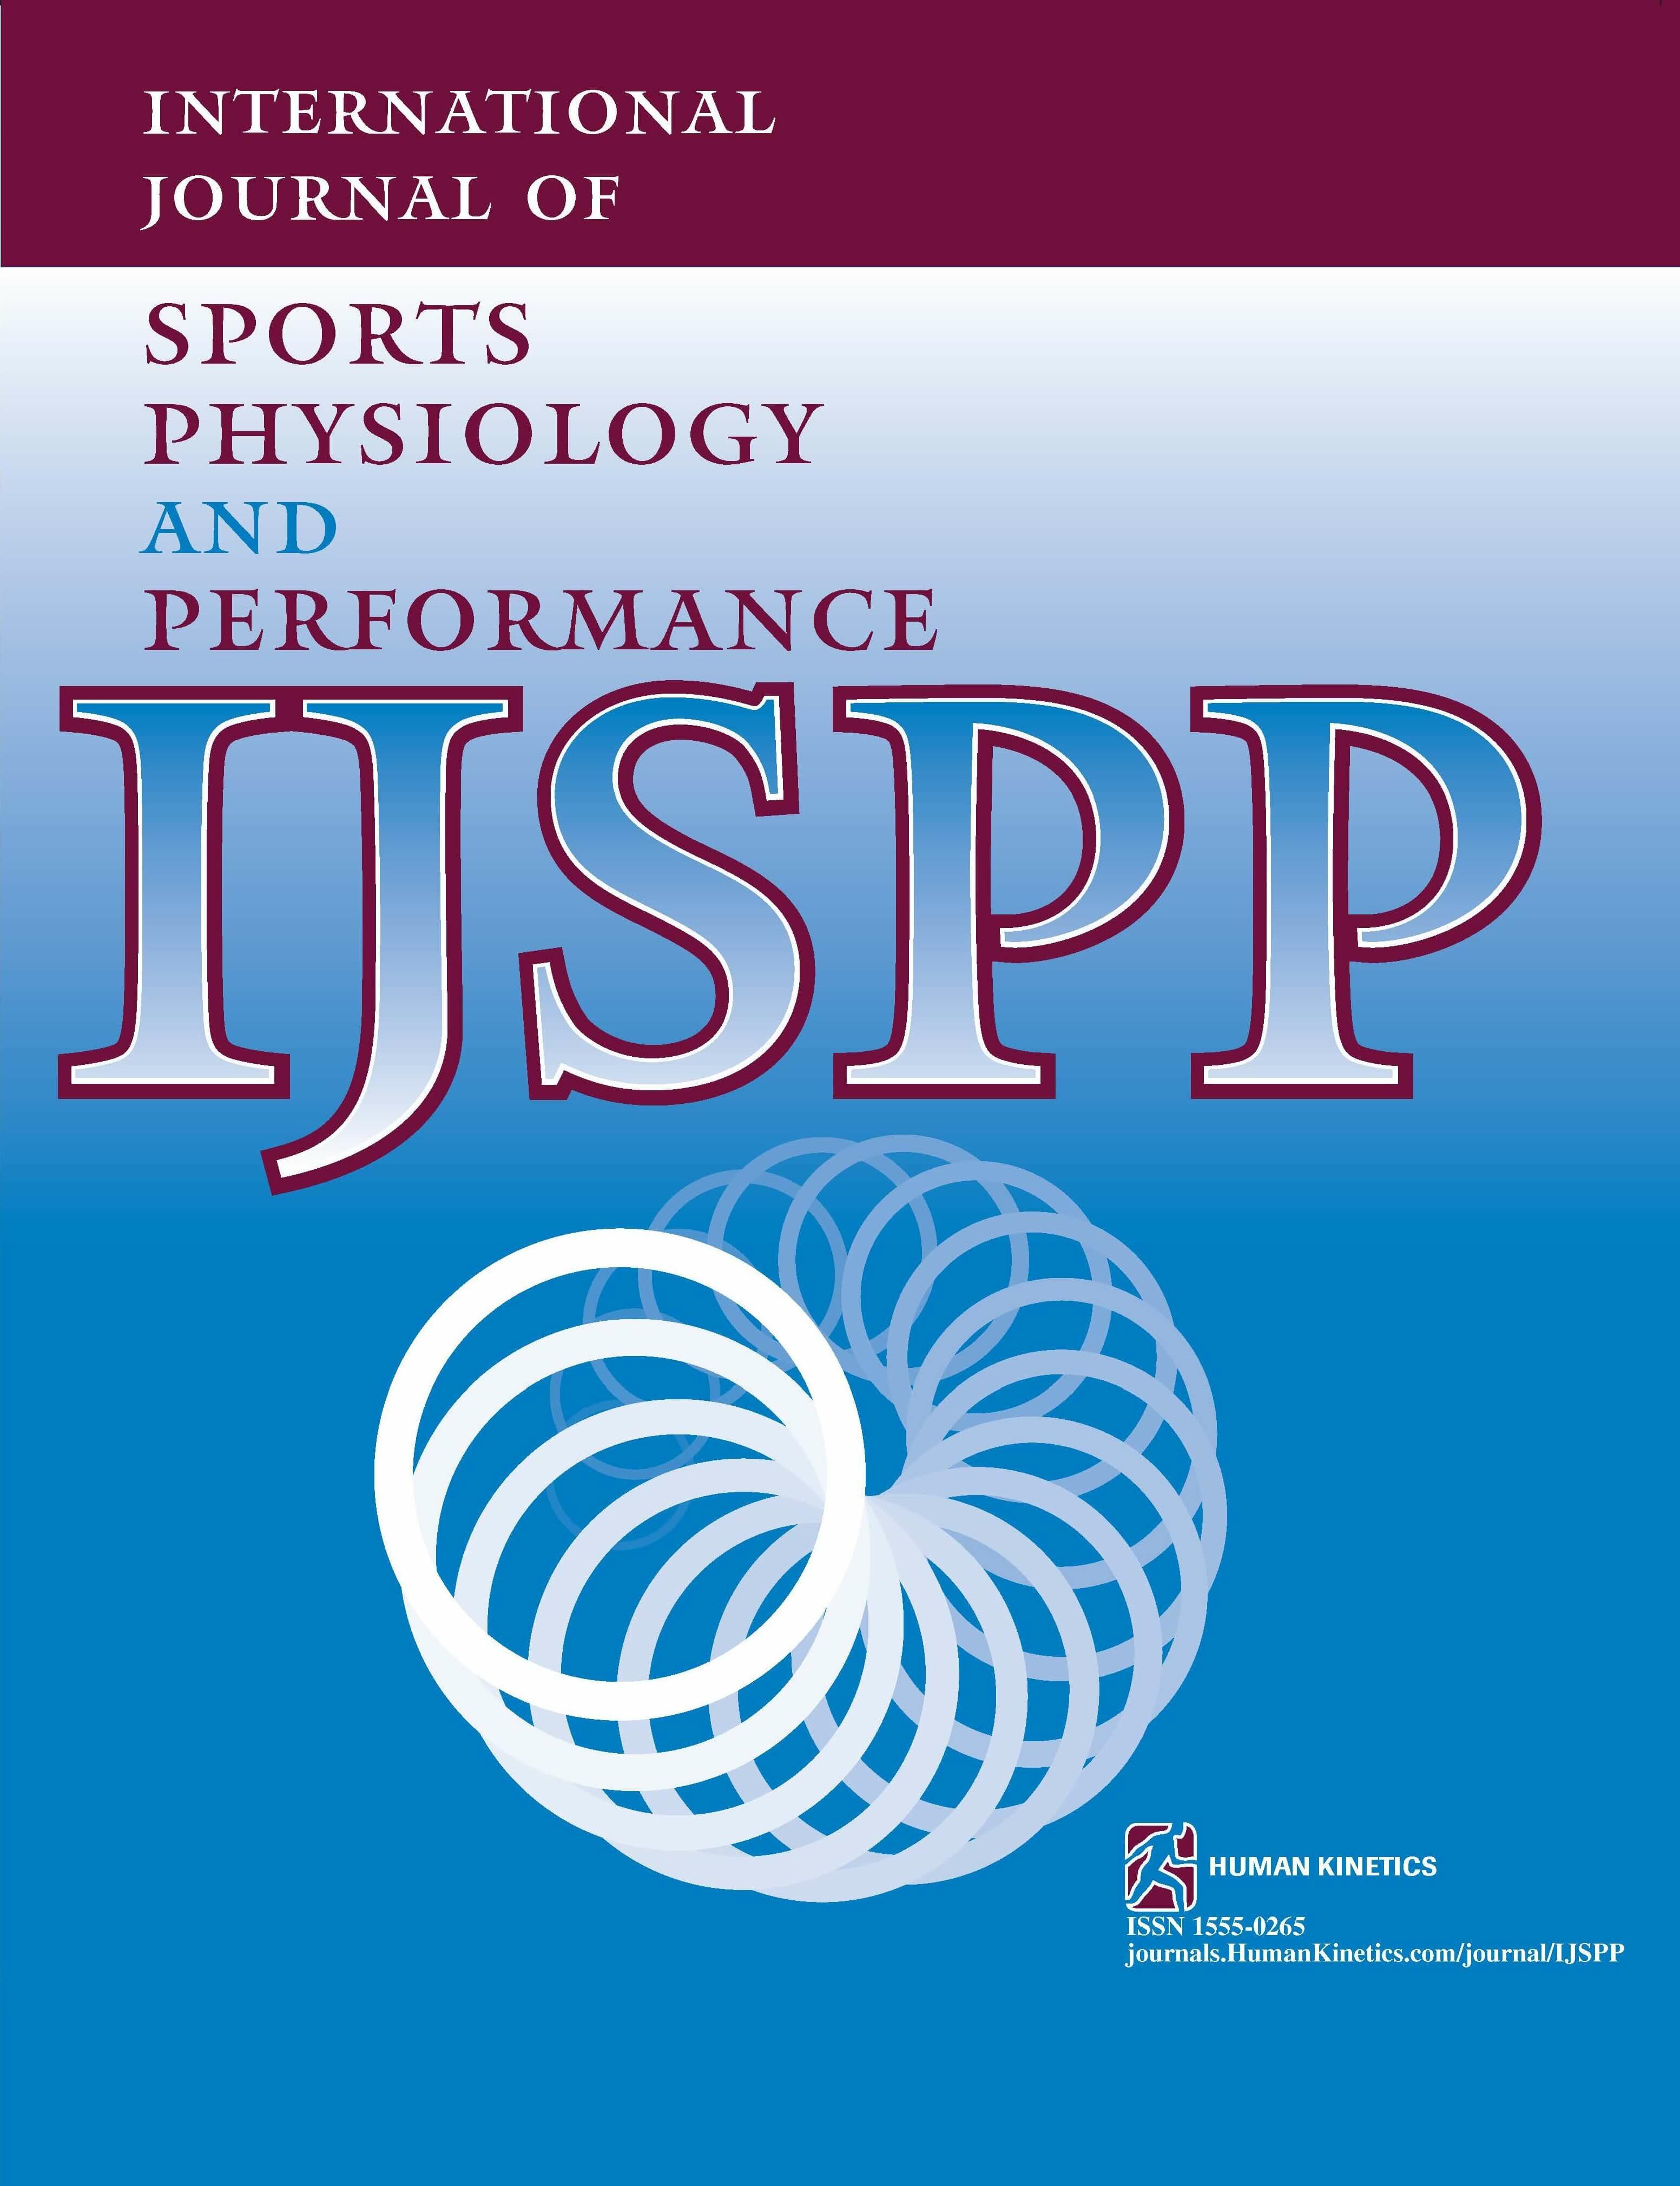 Variability of External Load Measures During Soccer Match Play: Influence of Player Fitness or Pacing?